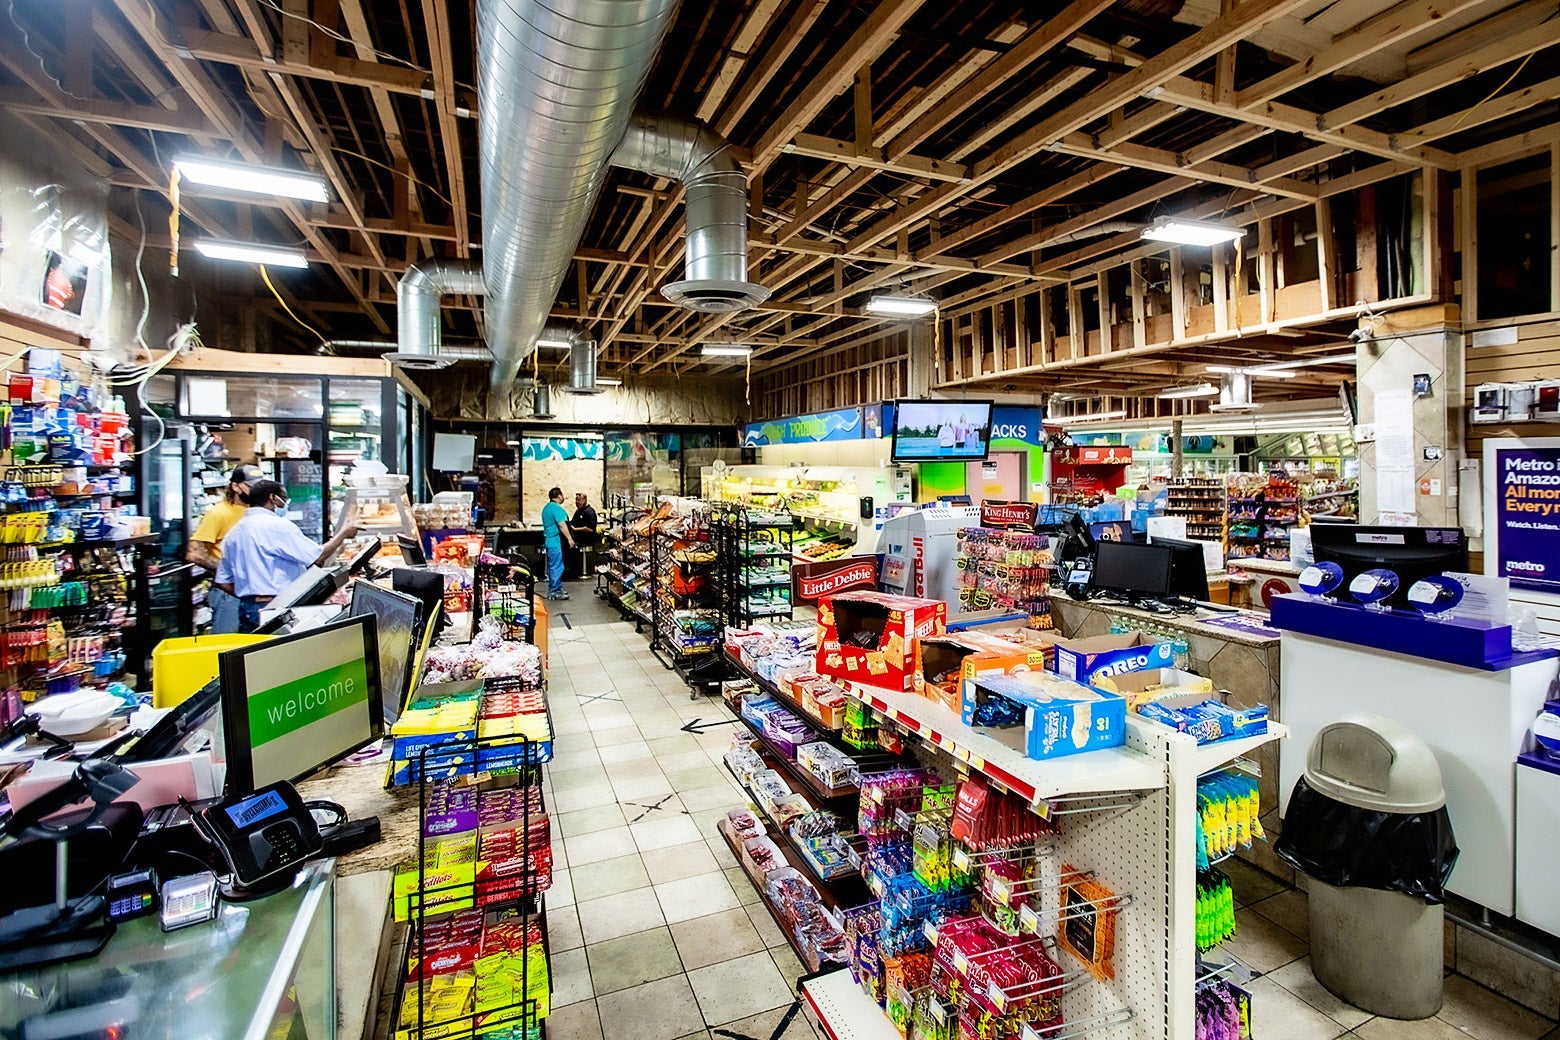 The interior of Cup Foods.